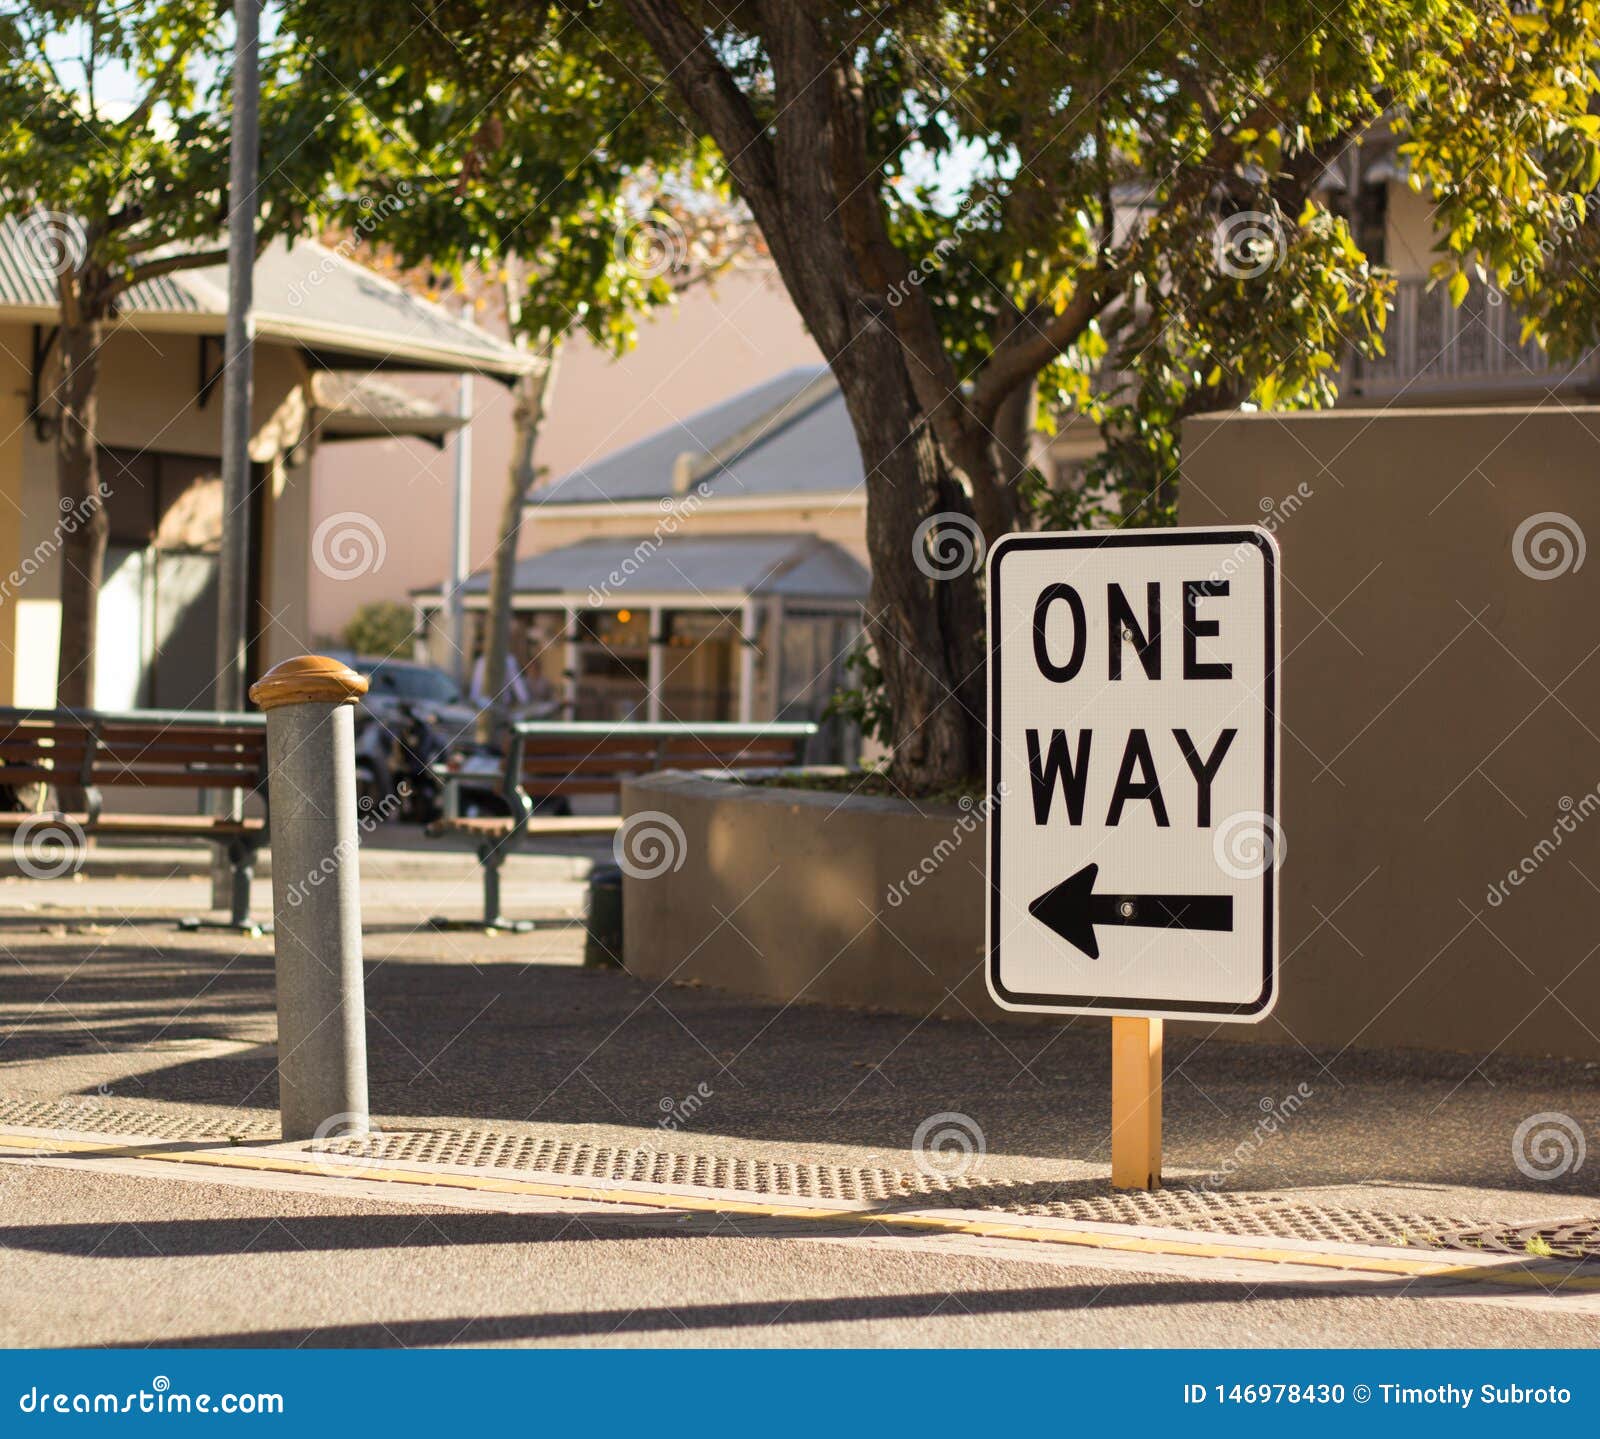 One Way Sign in a Street stock photo. Image of communication - 146978430 One Way Street Signs